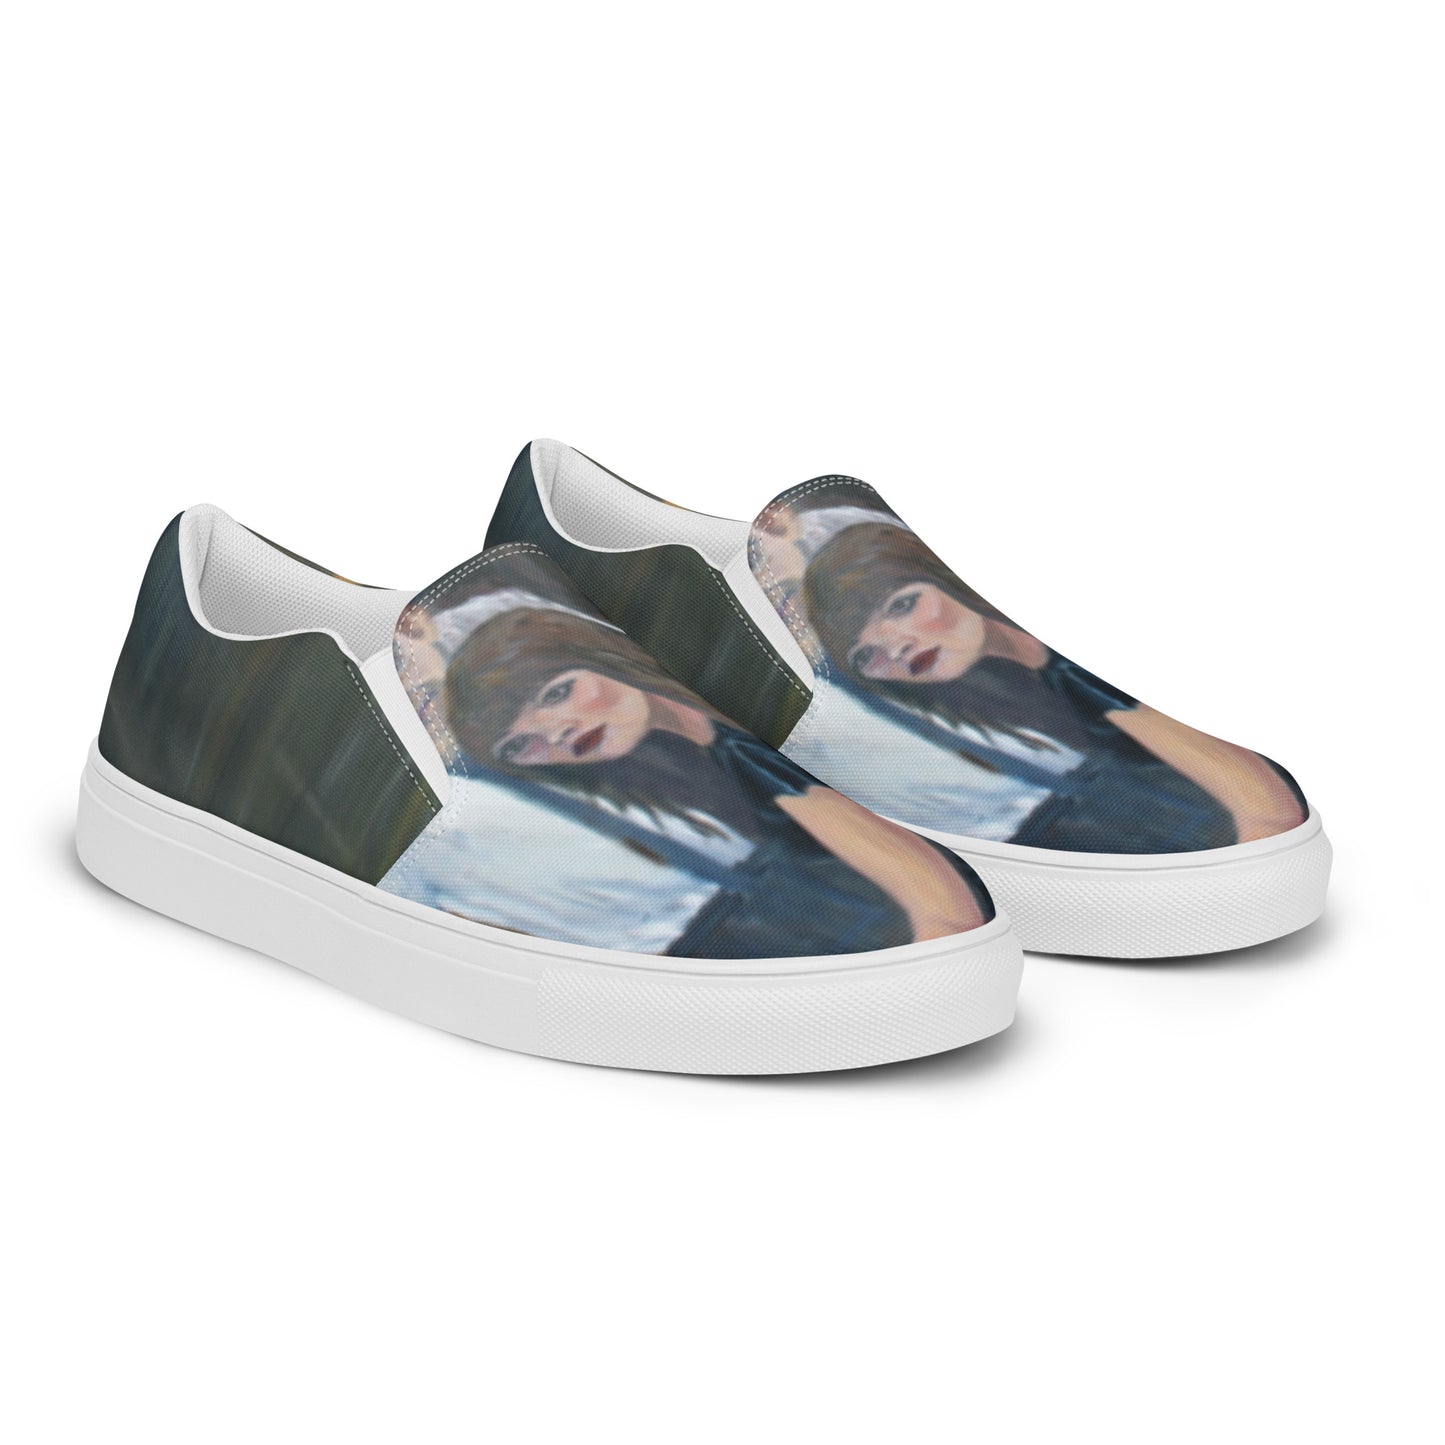 Friday Night - Men’s slip-on canvas shoes